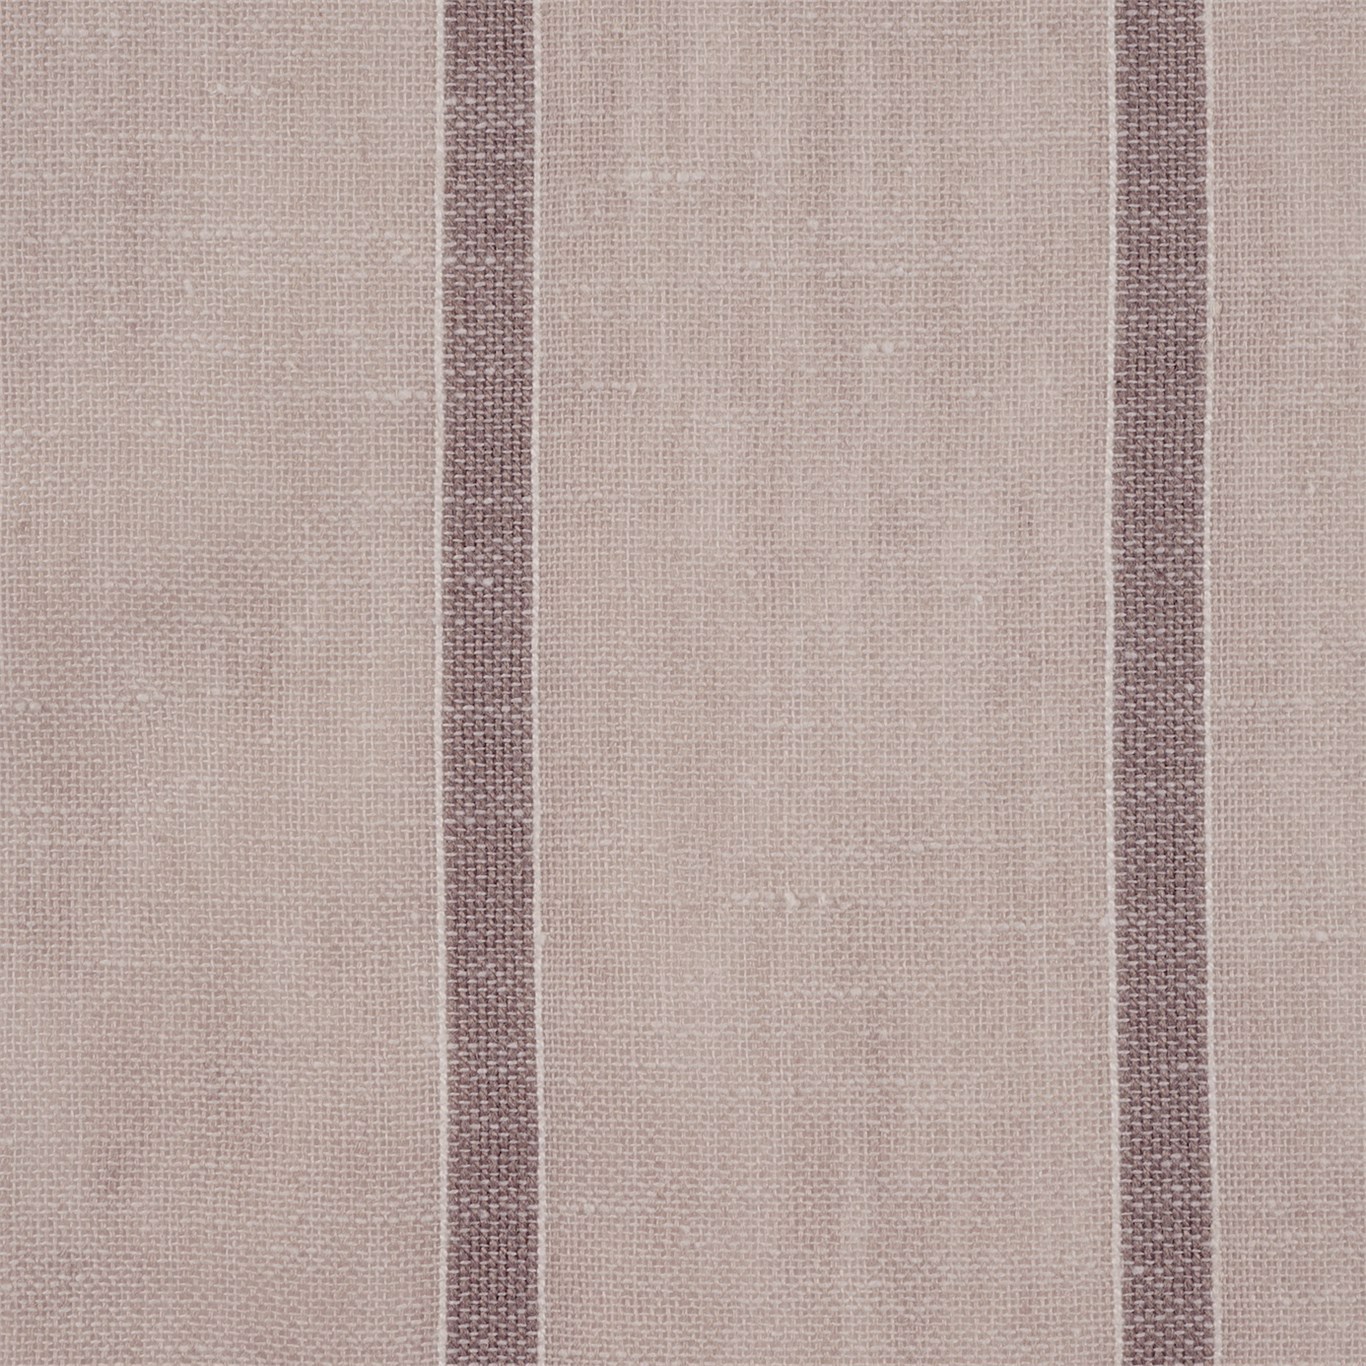 Purity Voiles Jute Fabric by HAR